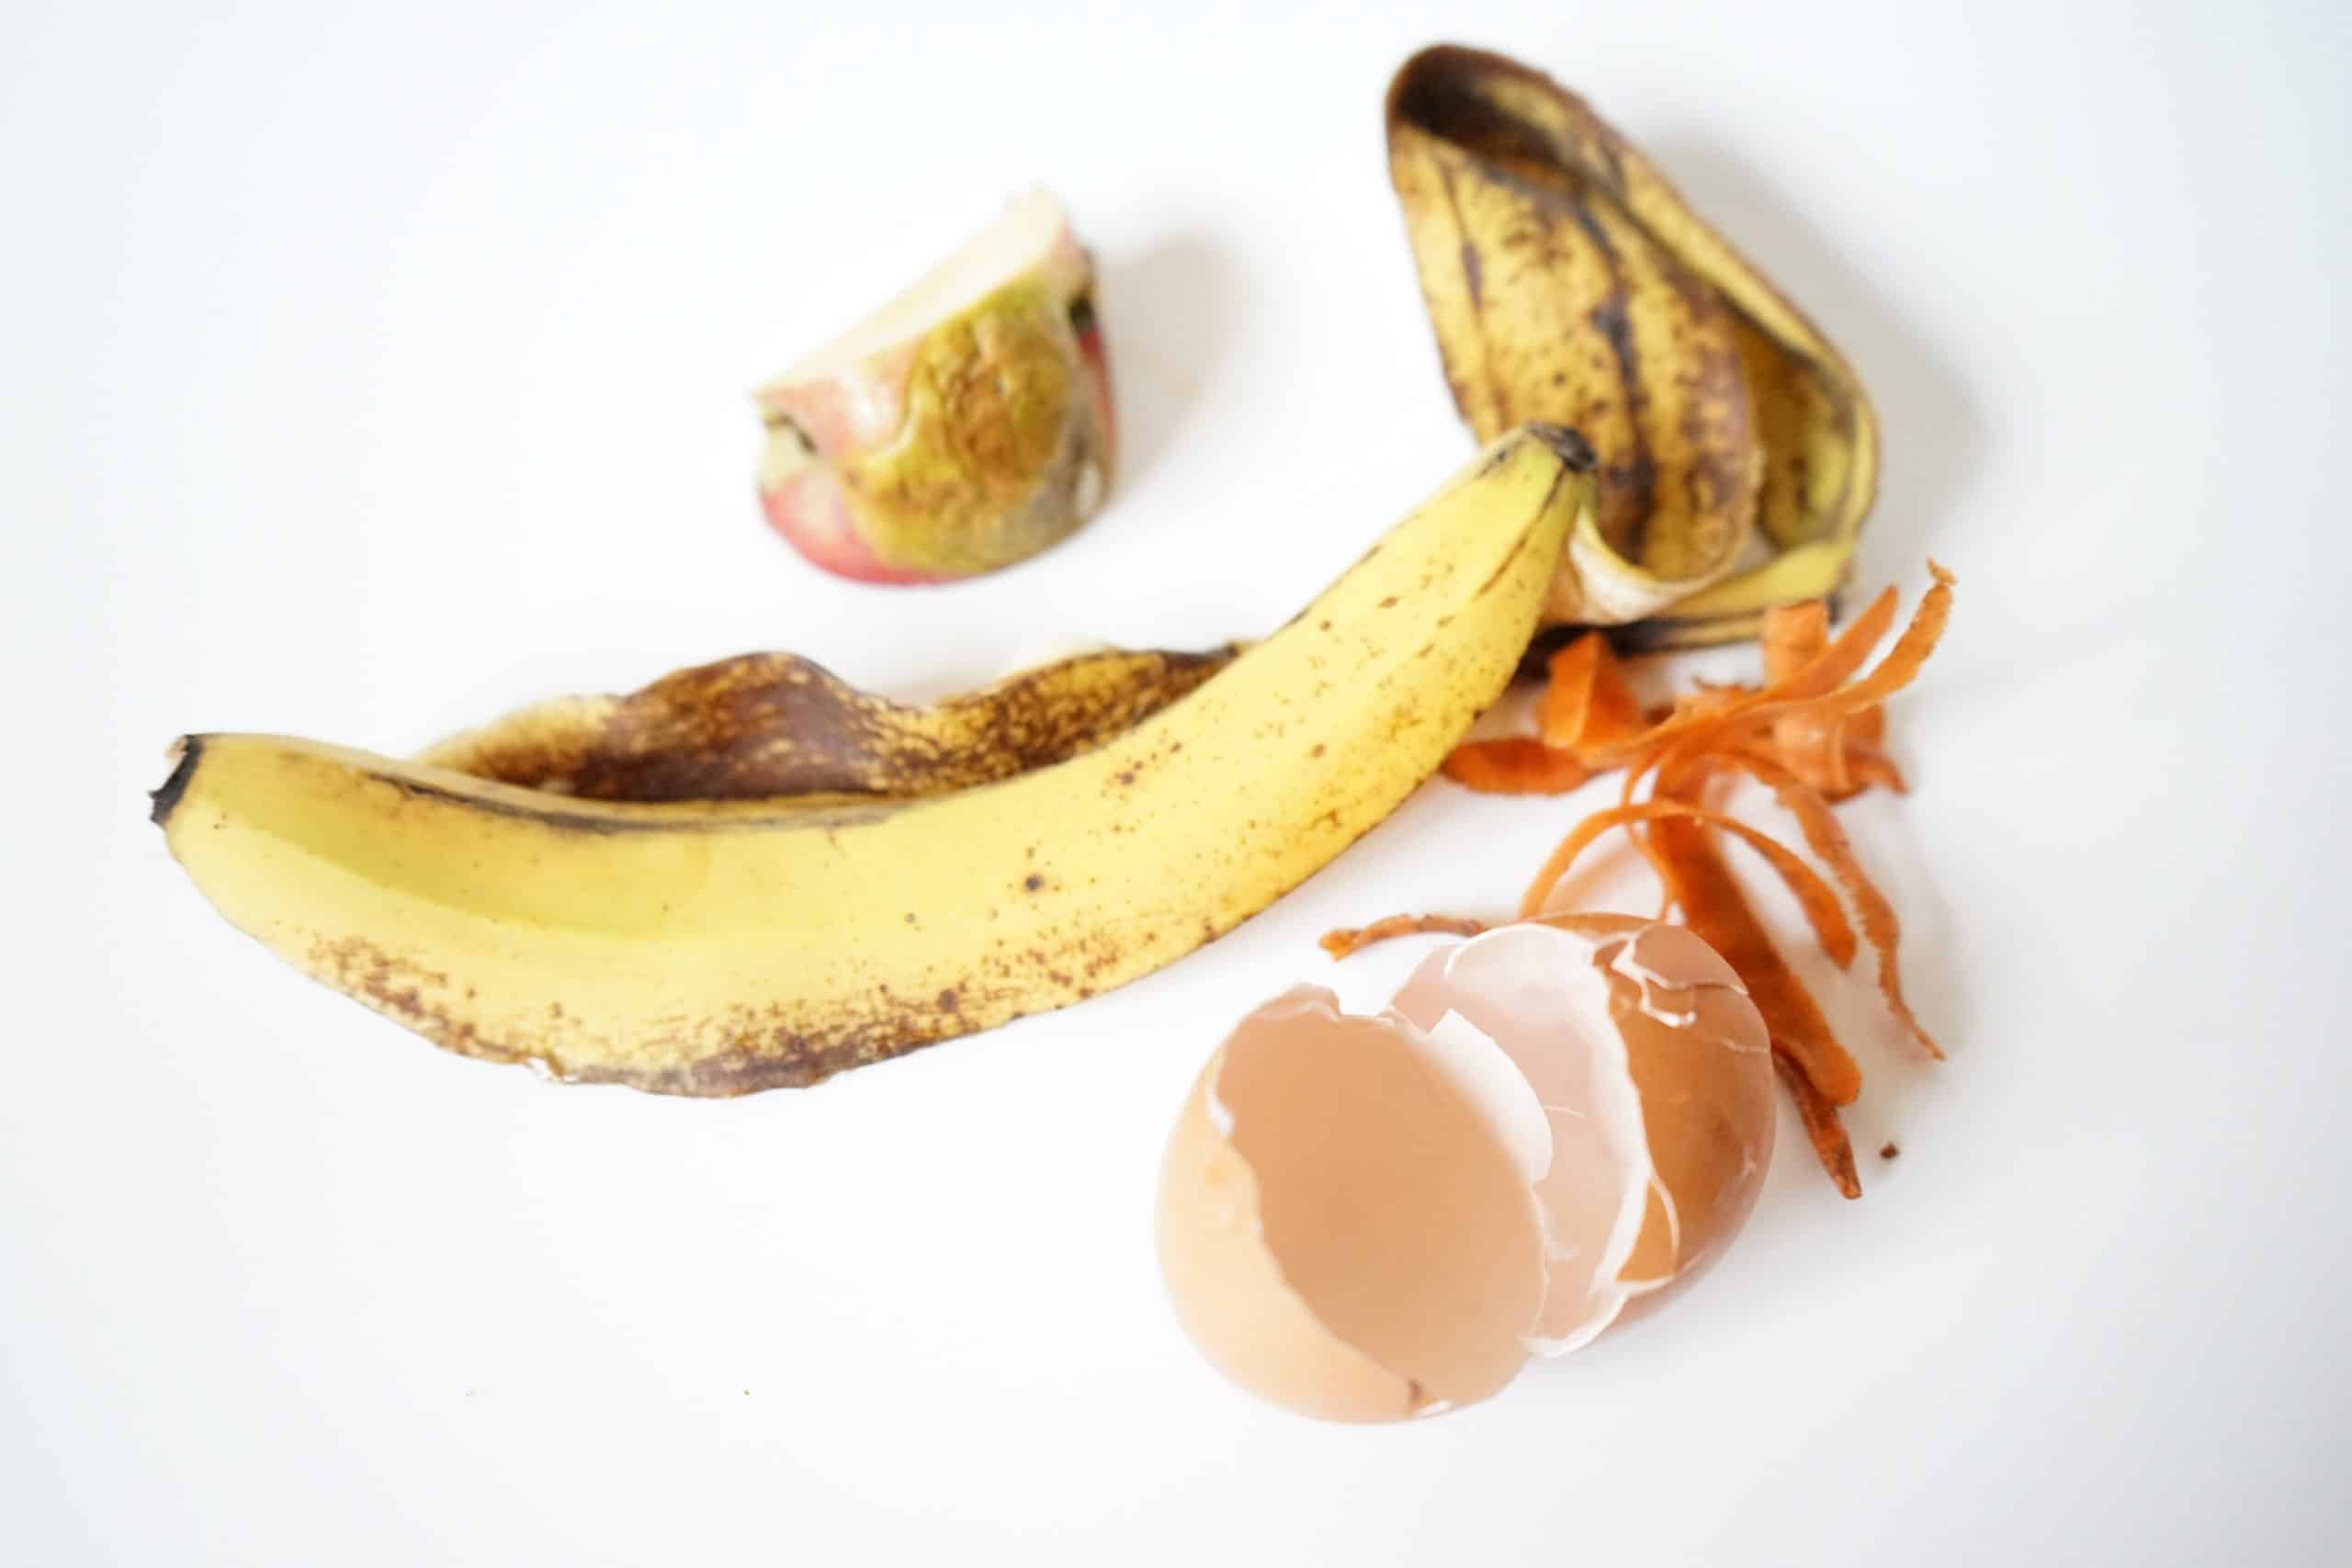 Why Bother Separating Food Scraps?